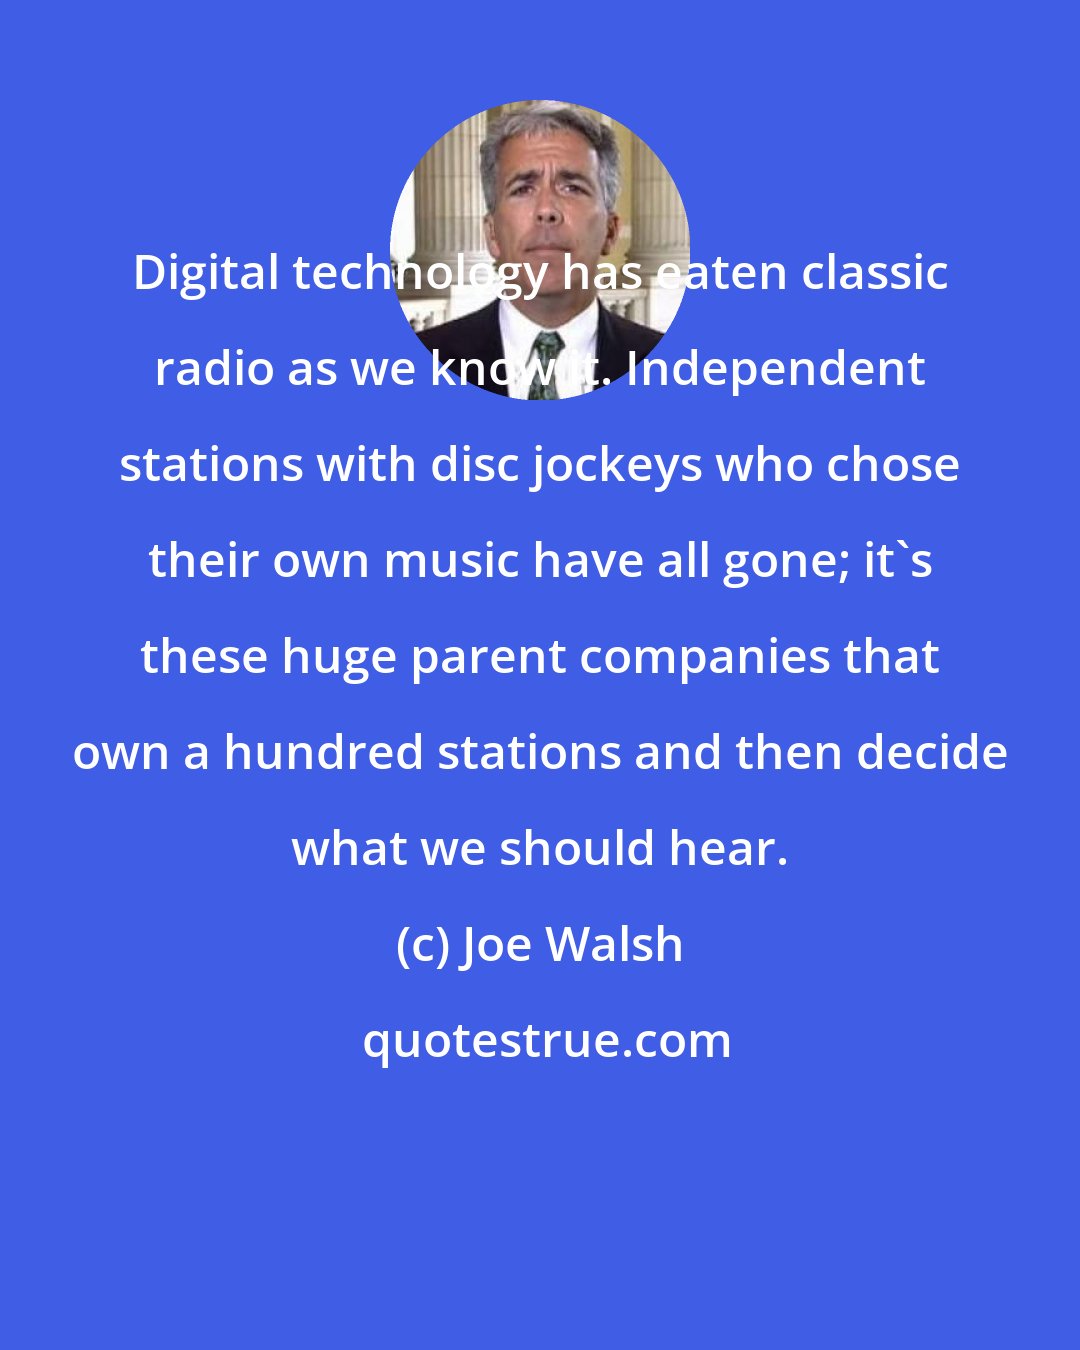 Joe Walsh: Digital technology has eaten classic radio as we know it. Independent stations with disc jockeys who chose their own music have all gone; it's these huge parent companies that own a hundred stations and then decide what we should hear.